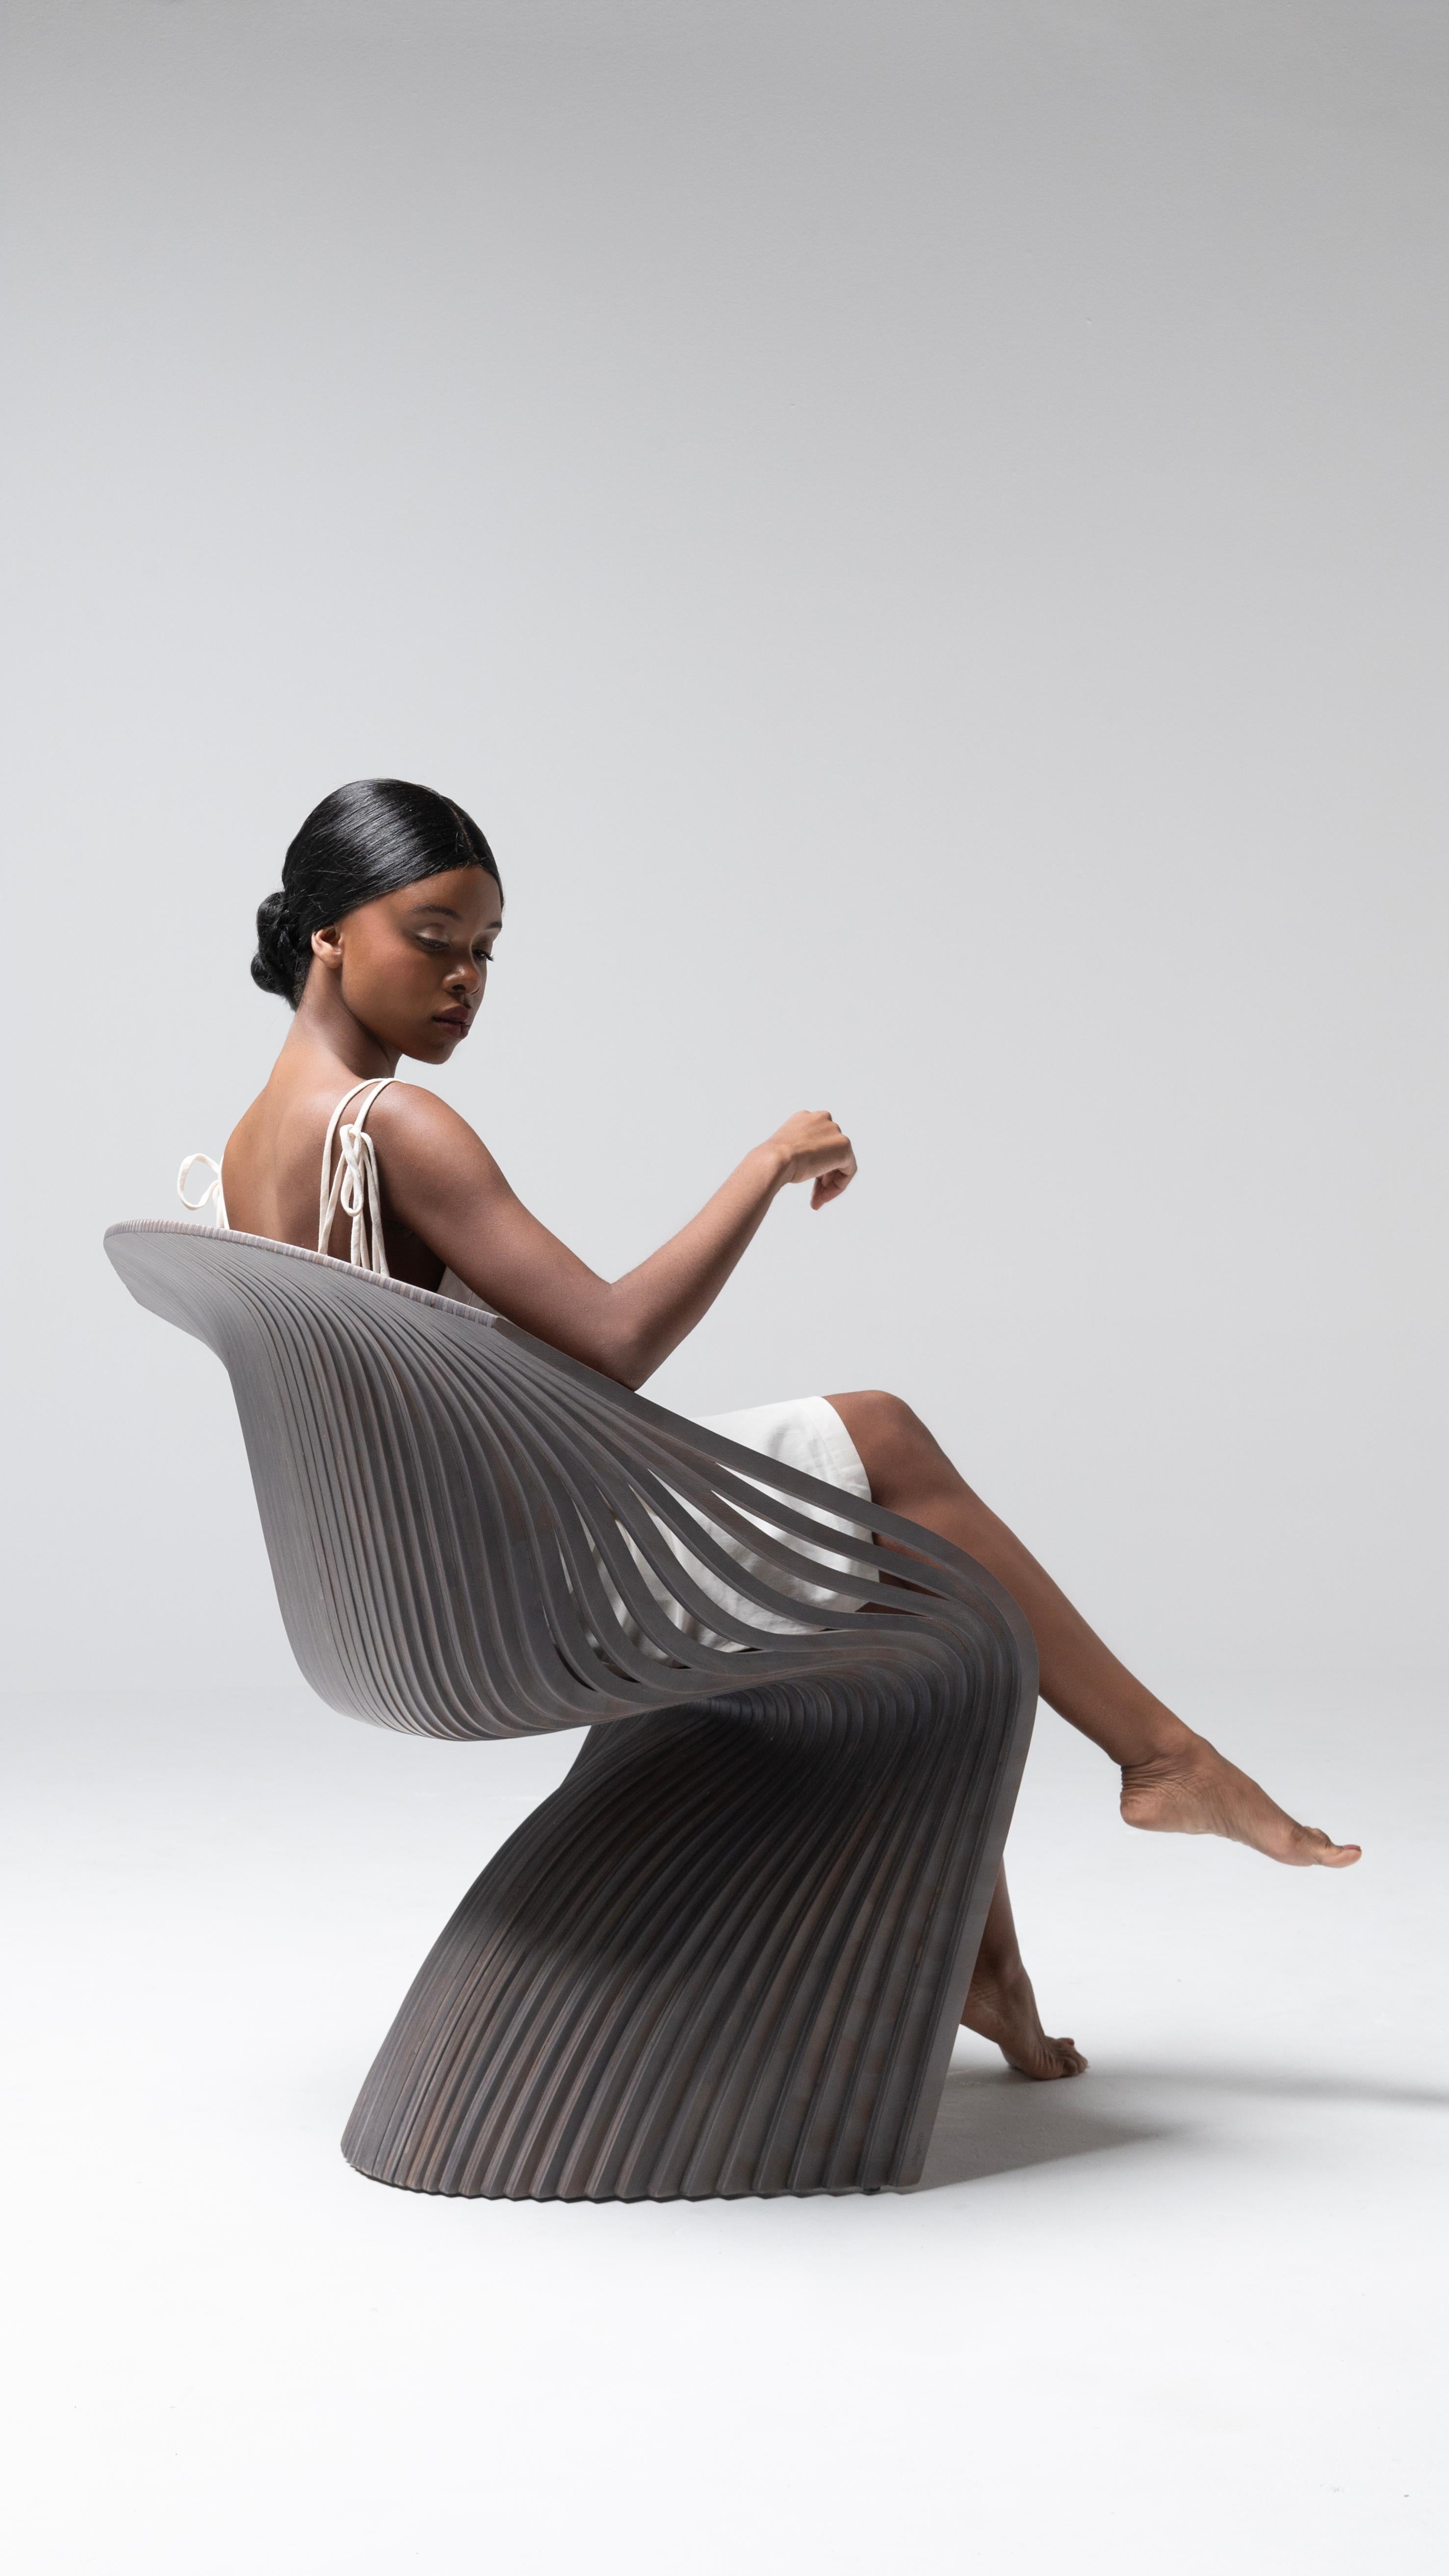 Laminated Aida Chair by Piegatto, a Sculptural Contemporary Chair  For Sale